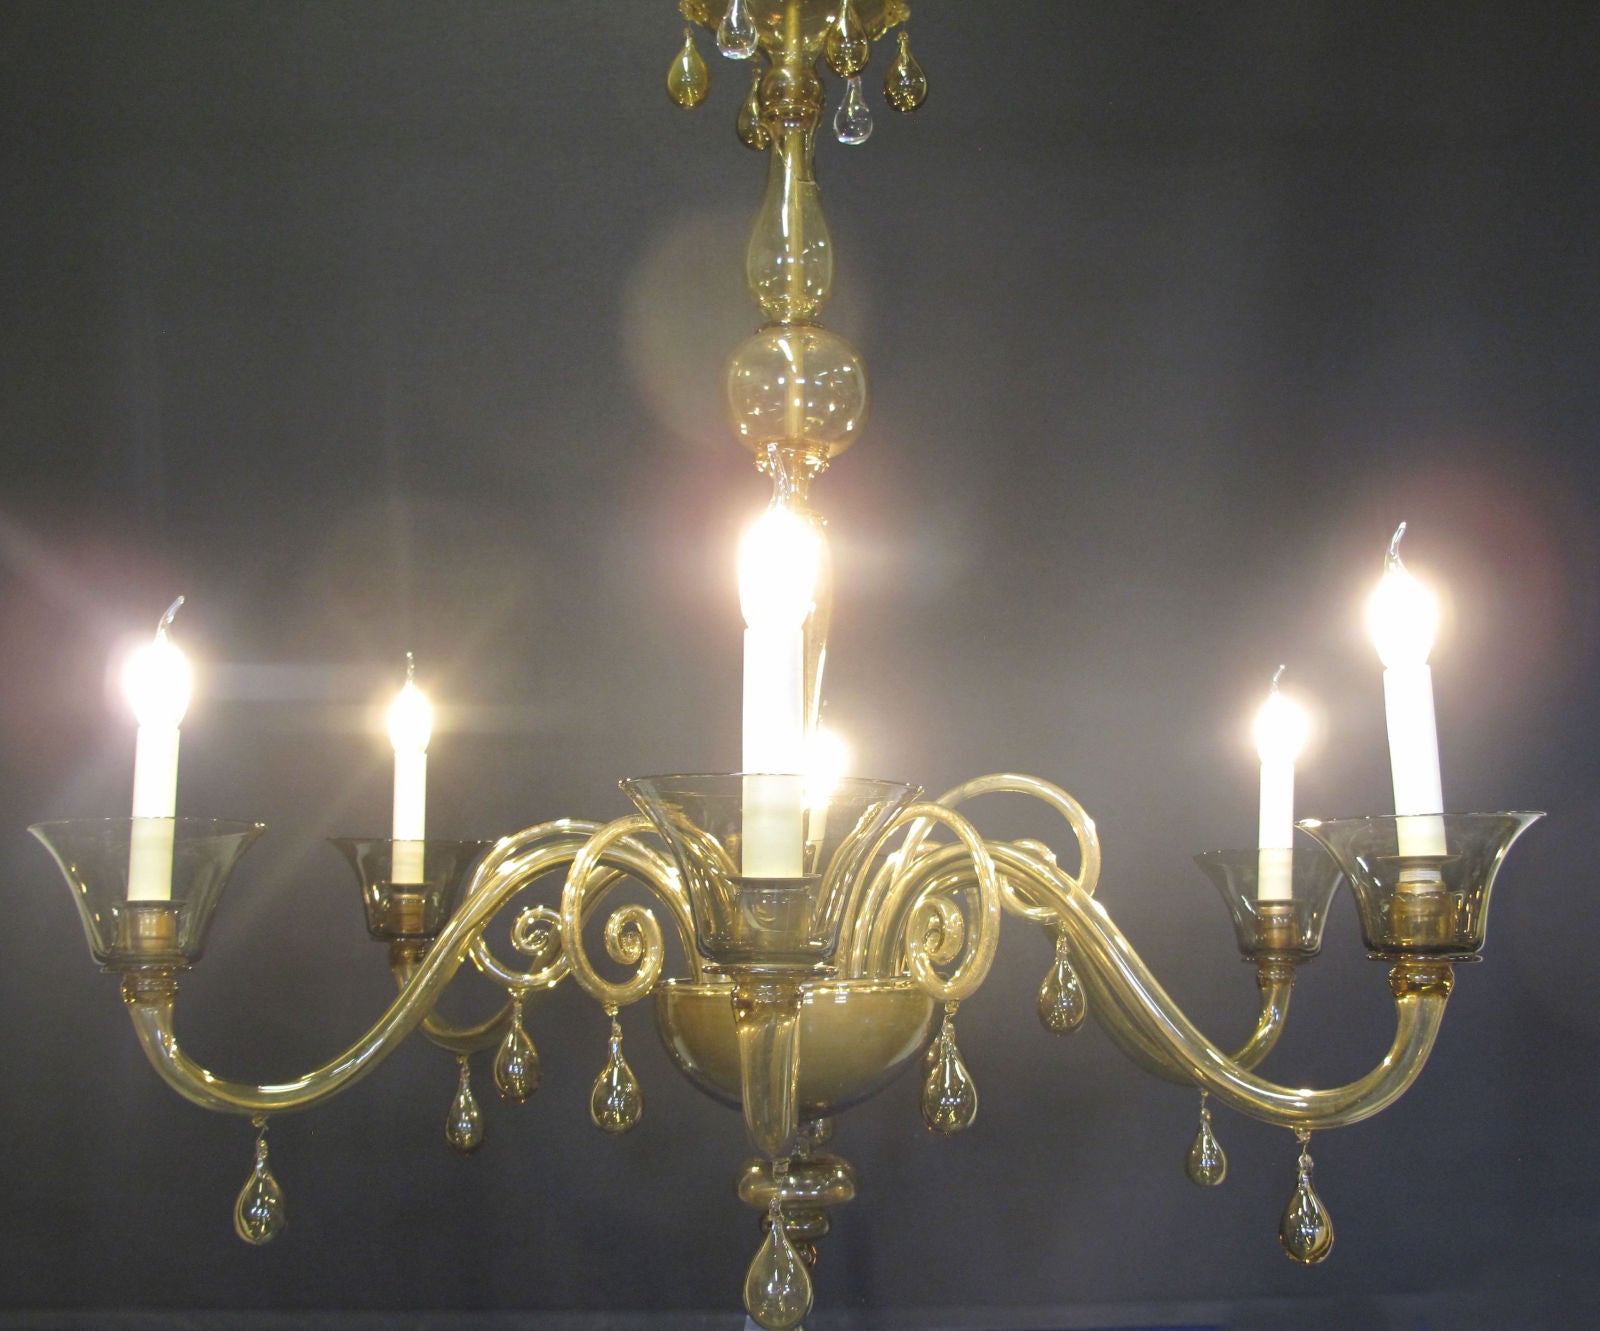 front view with chandelier lit